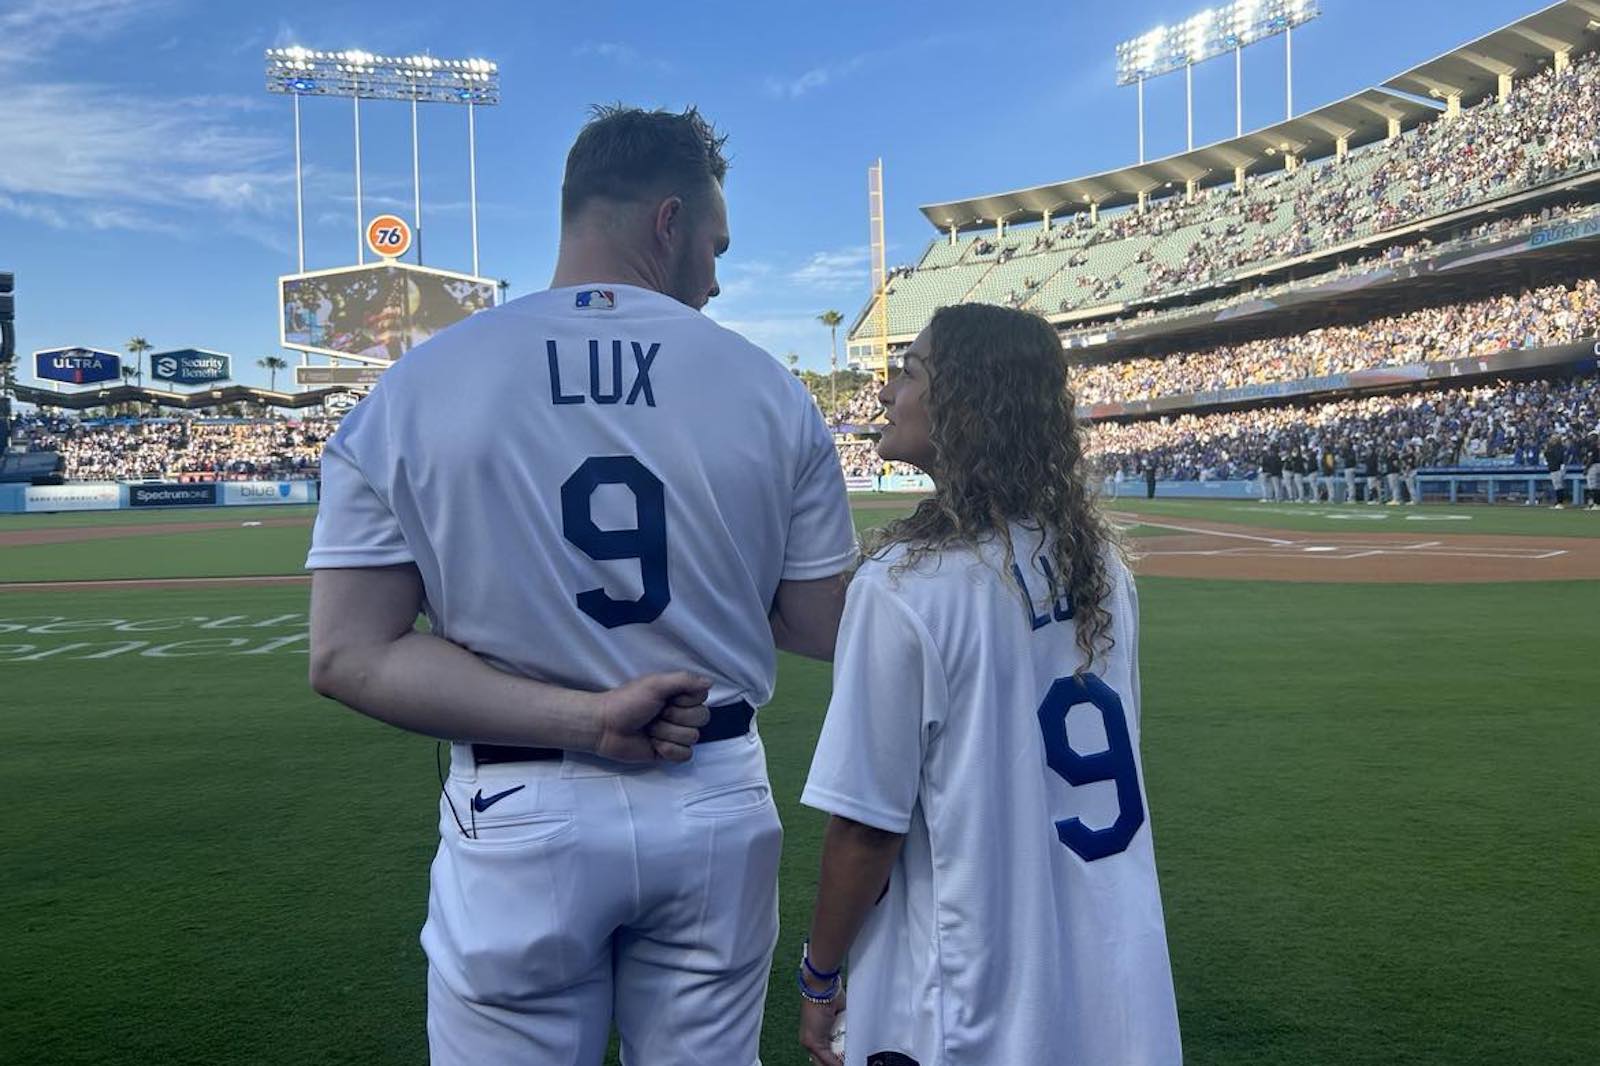 Q&A With Gavin Lux - Dodgers (2020) 